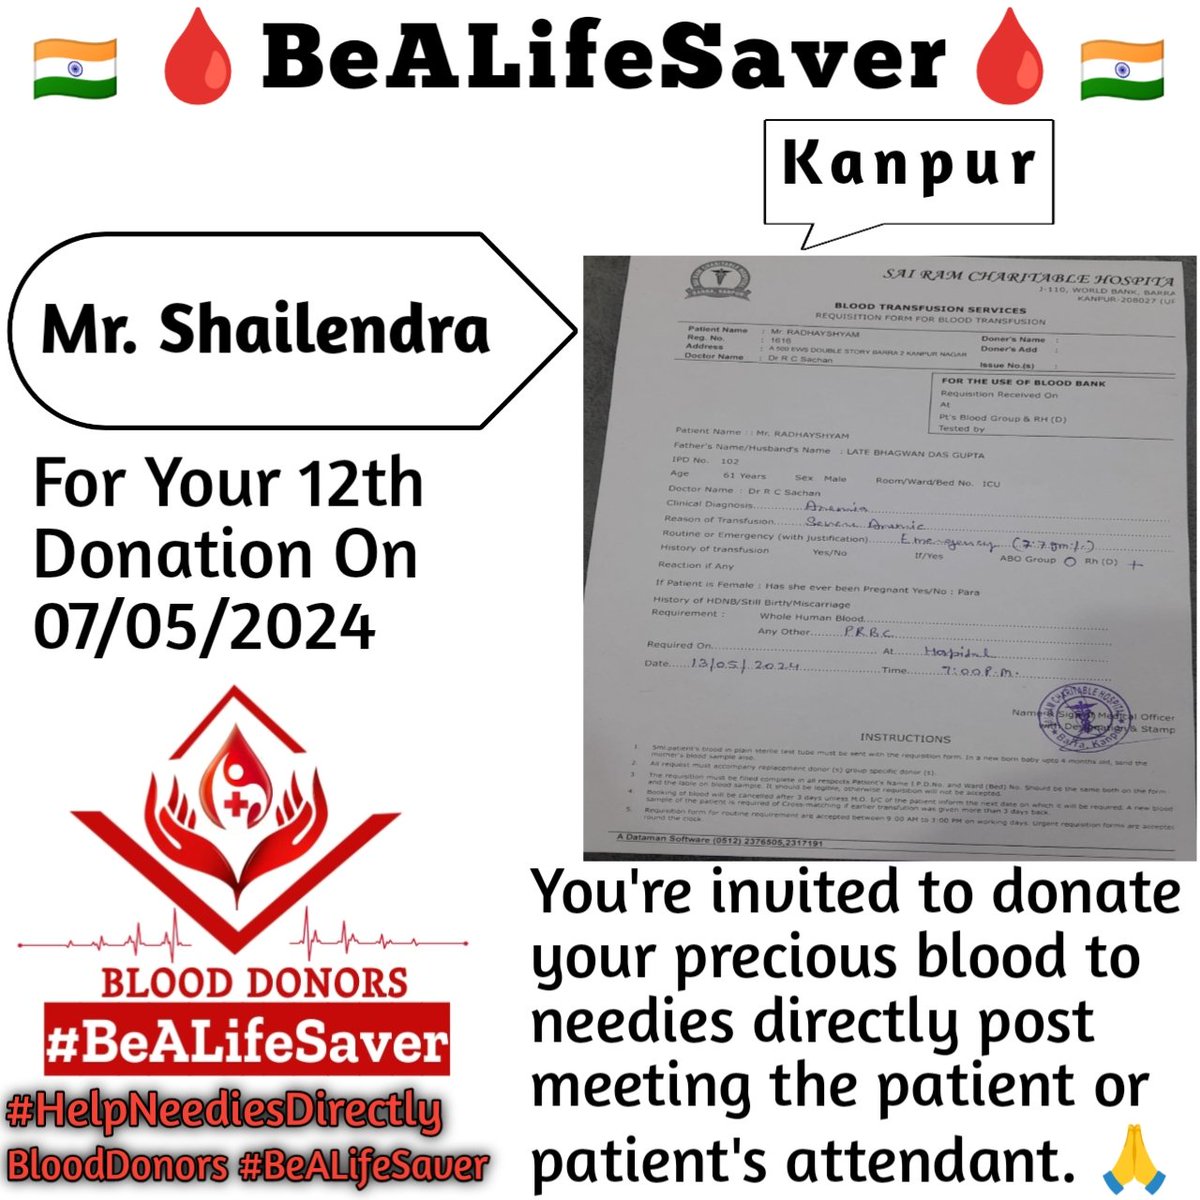 🙏 Congrats For 12th Blood Donation 🙏
Kanpur BeALifeSaver
Kudos_Mr_Shailendra_Ji

Today's hero
Mr. Shailendra Ji donated blood in Kanpur for the 12th Time for one of the needies. Heartfelt Gratitude and Respect to Shailendra Ji for his blood donation for Patient admitted in